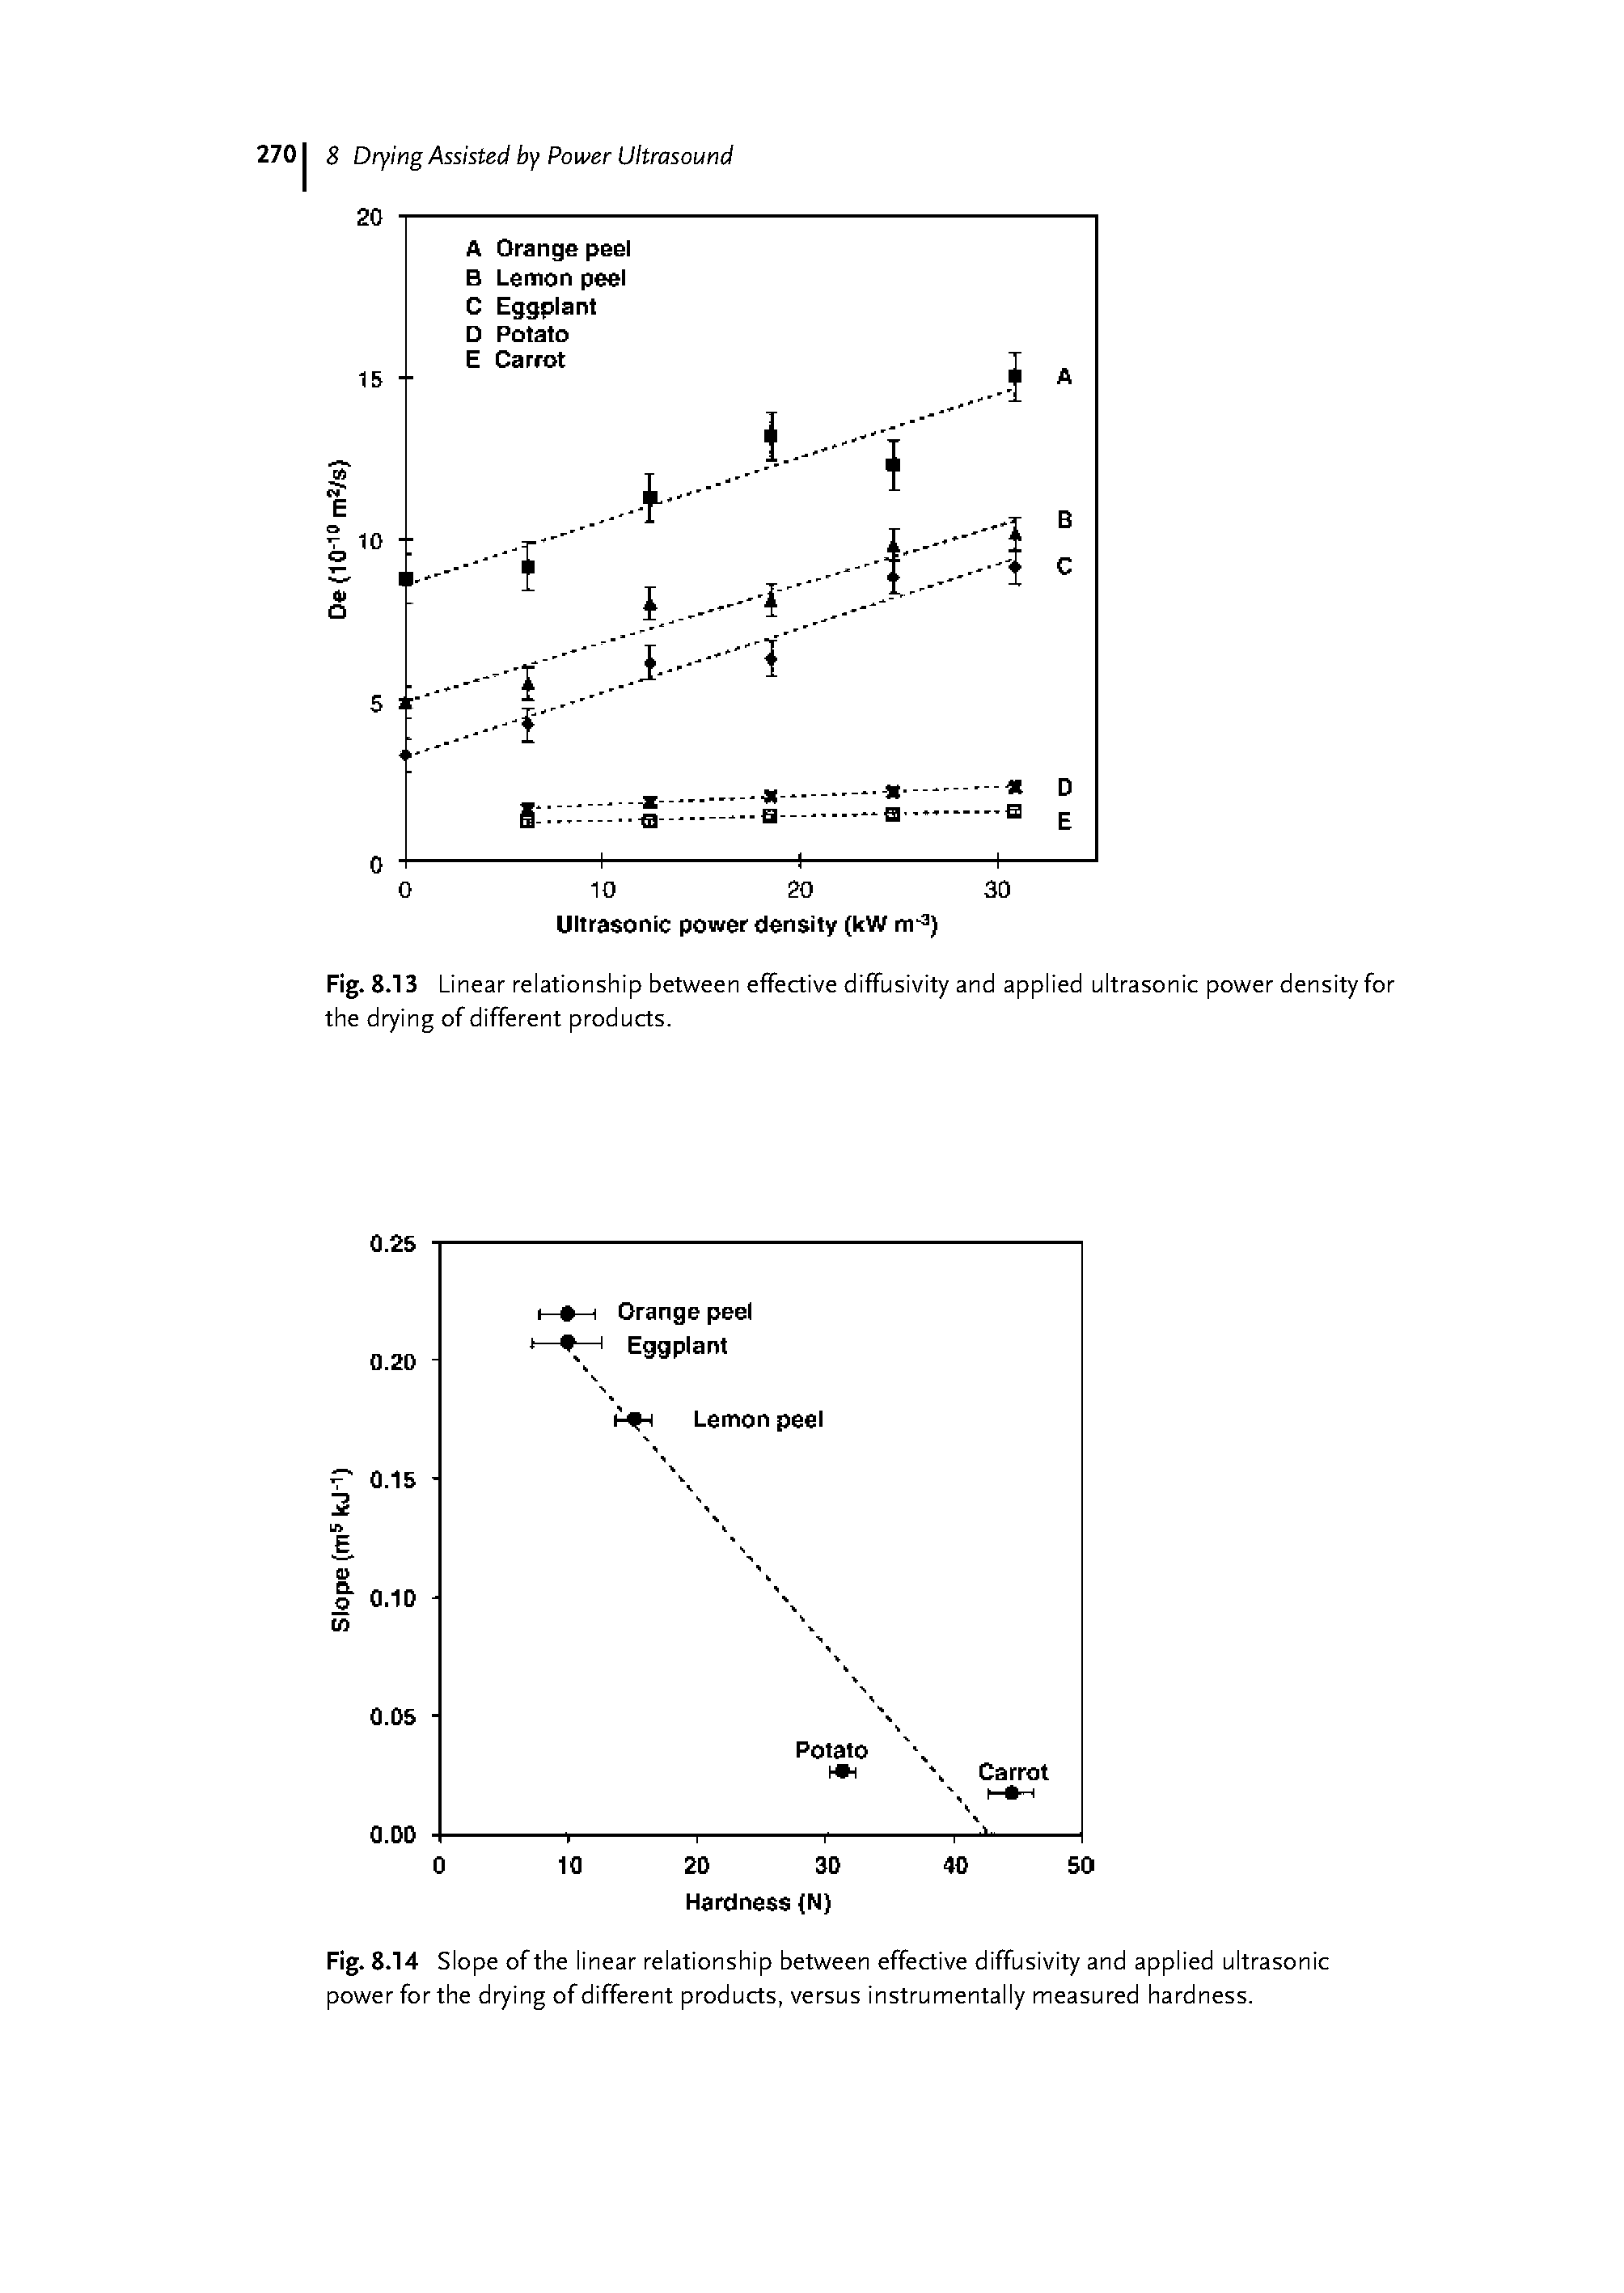 Fig. 8.14 Slope of the linear relationship between effective diffusivity and applied ultrasonic power for the drying of different products, versus instrumentally measured hardness.